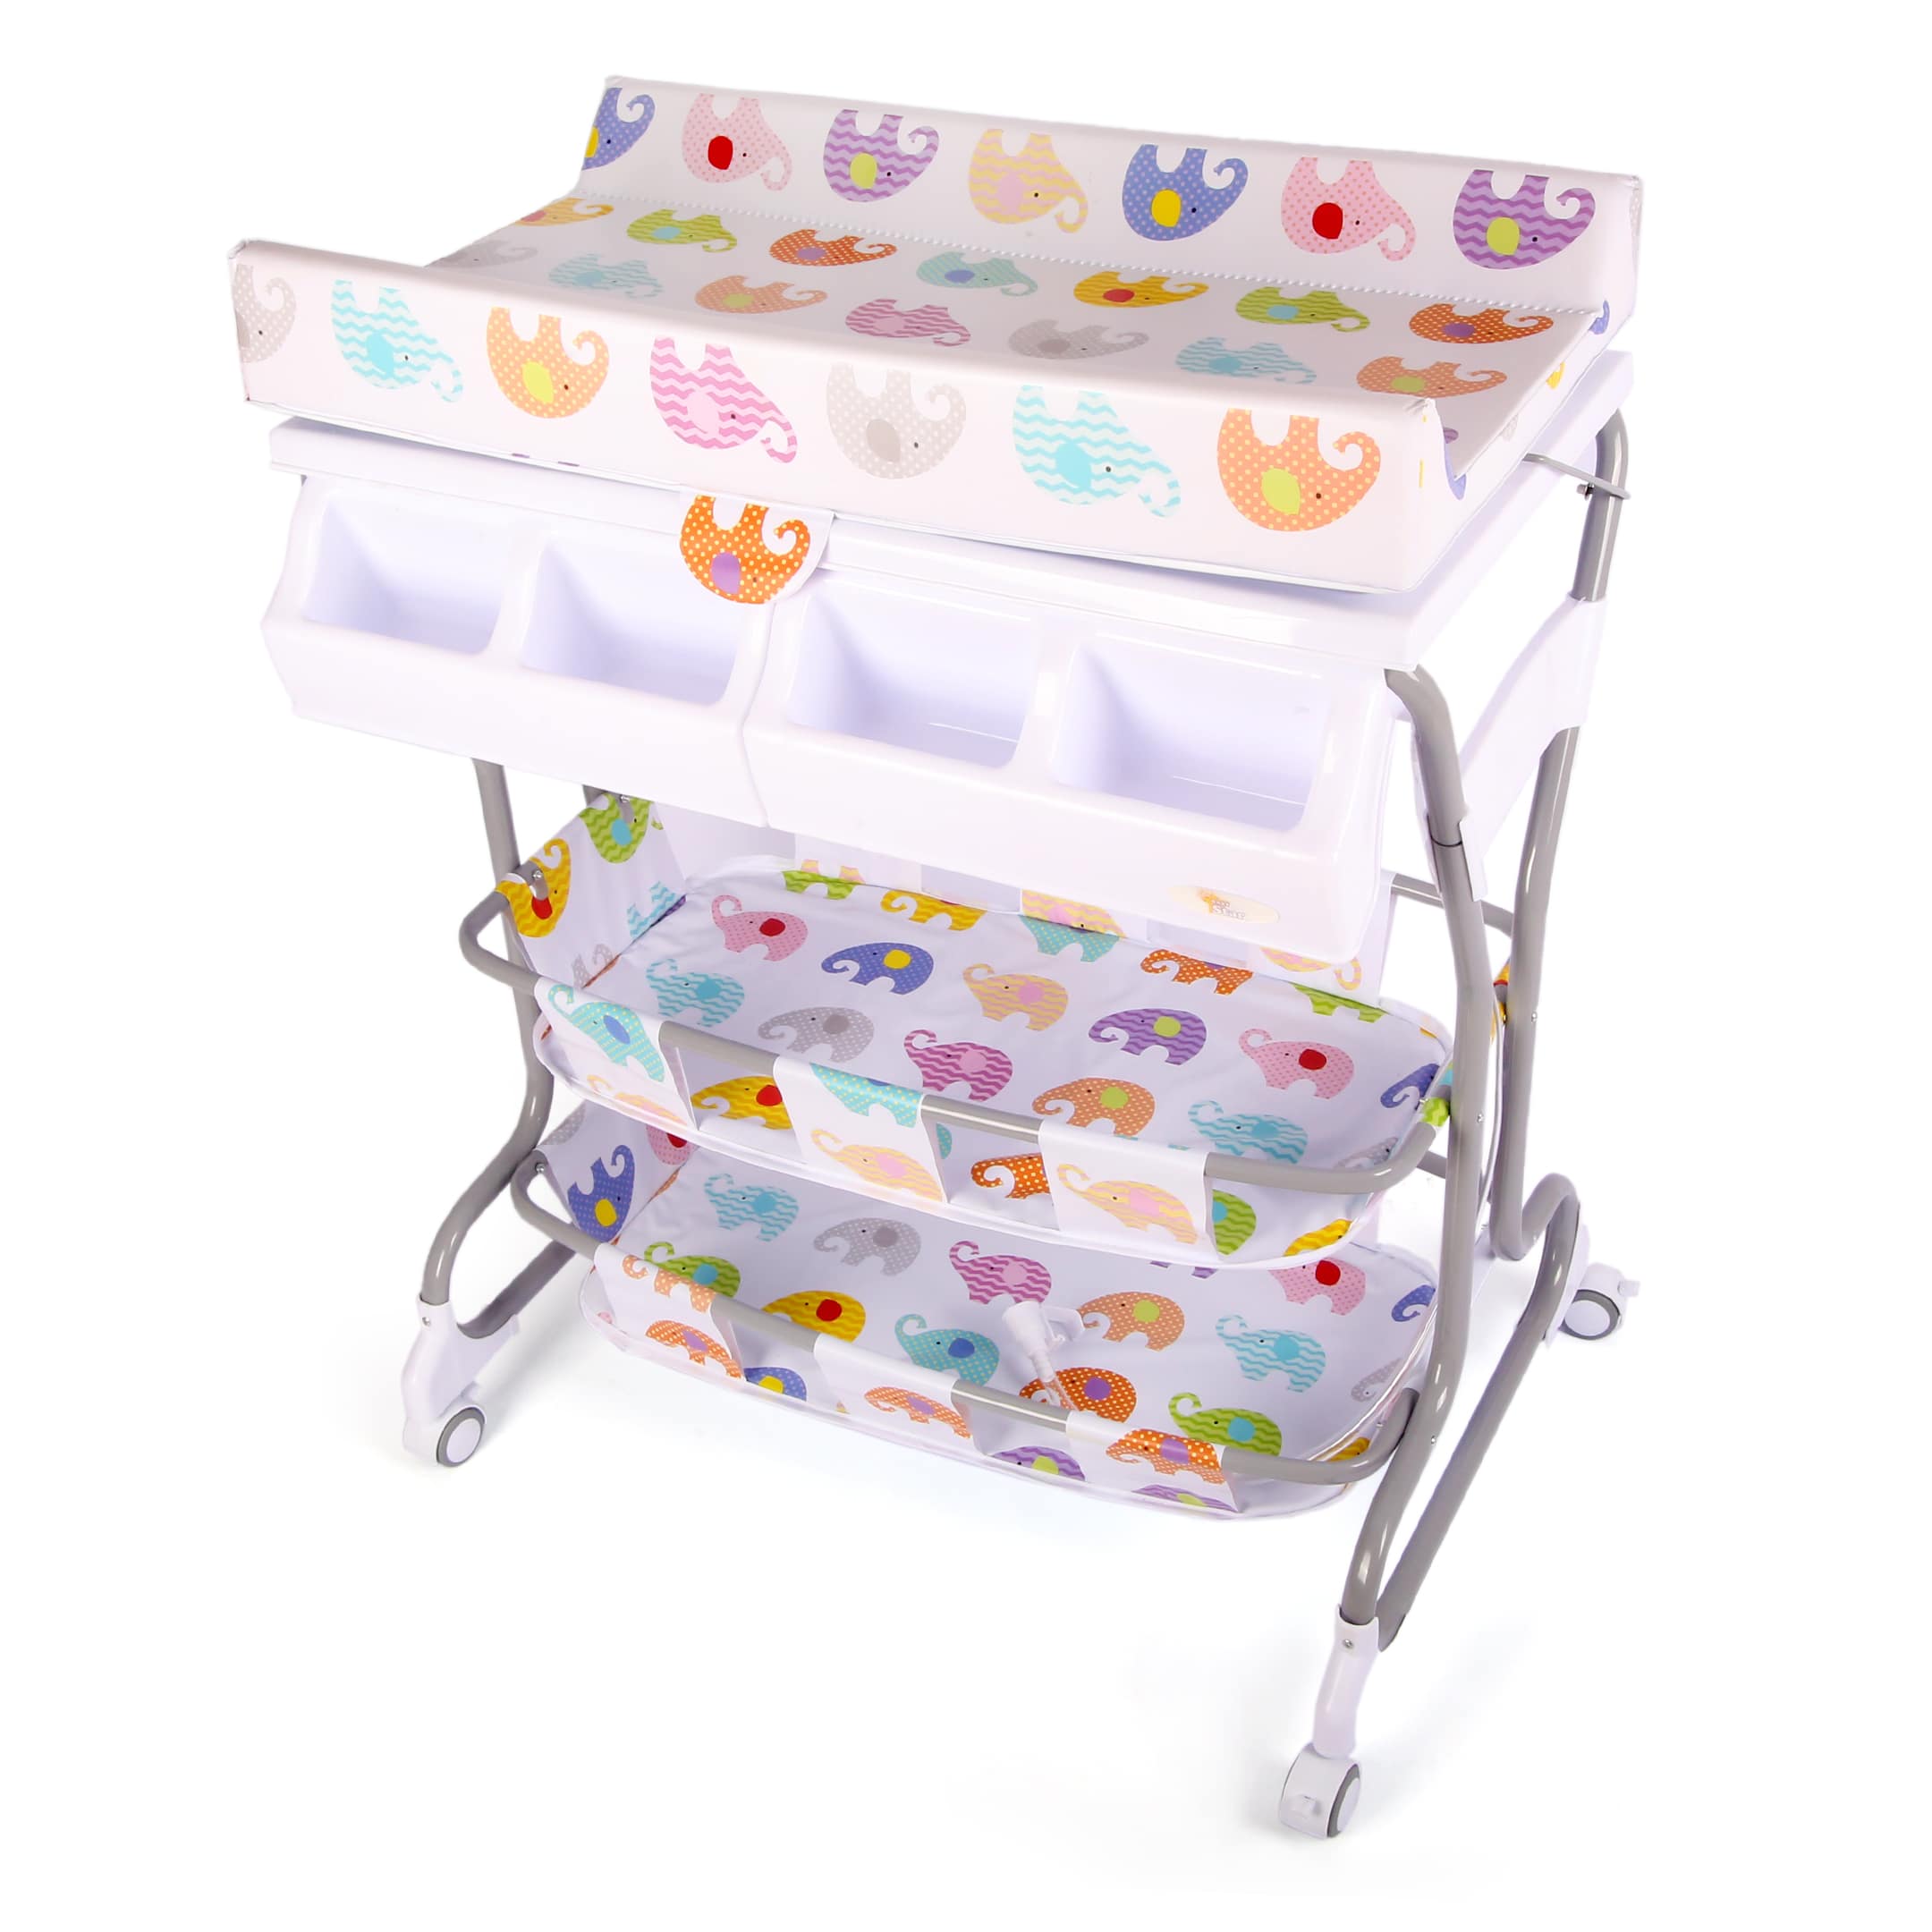 Multipurpose Baby Bath Station Changing Table